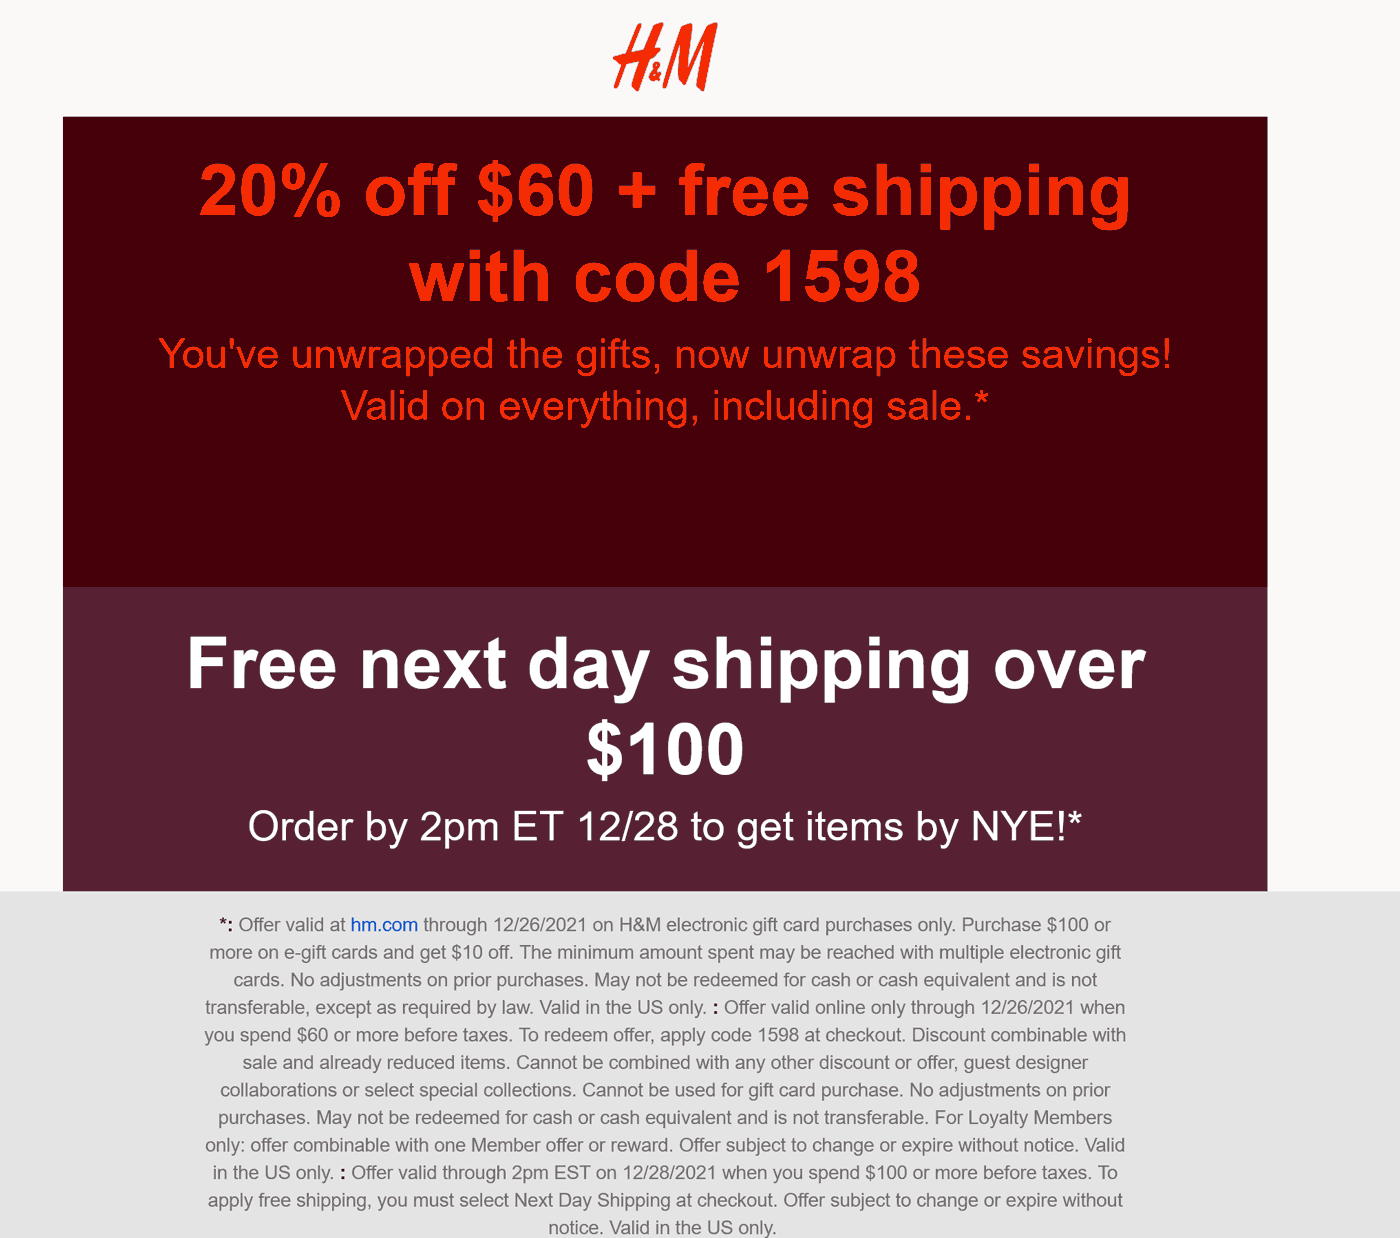 H&M stores Coupon  20% off $60 online today at H&M via promo code 1598 #hm 